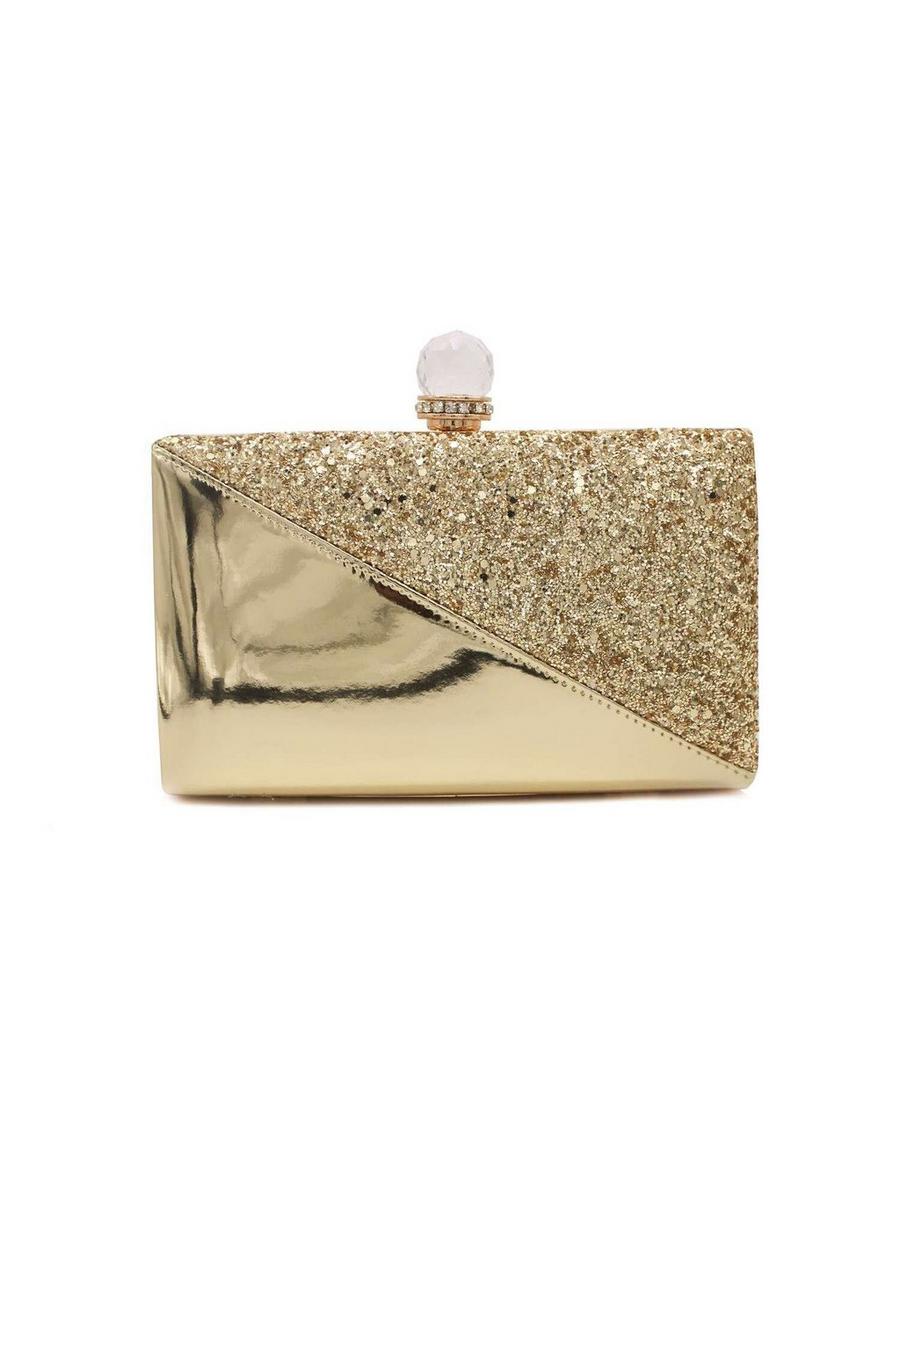 Gold Crystail Clasp Half Shiny Glitter Evening Clutch Bag